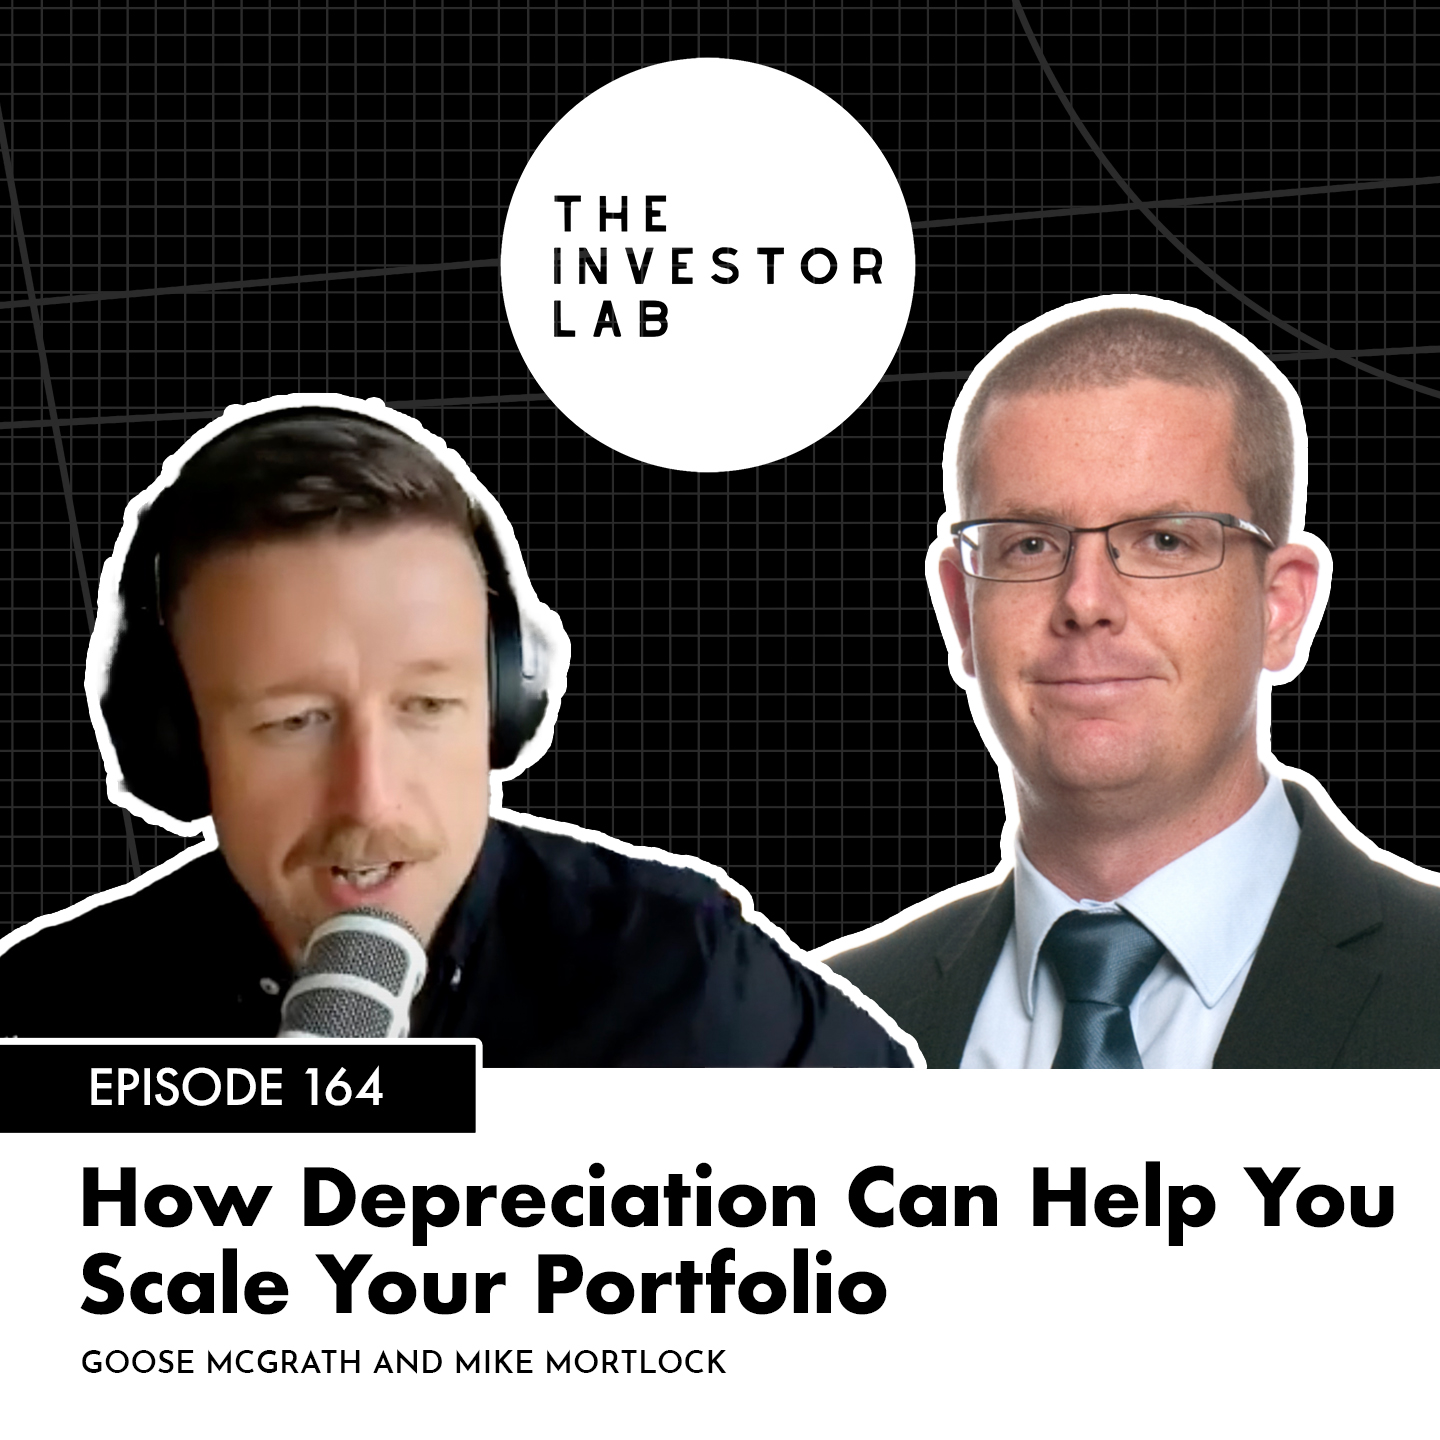 How Depreciation Can Help You Scale Your Portfolio w/ Mike Mortlock